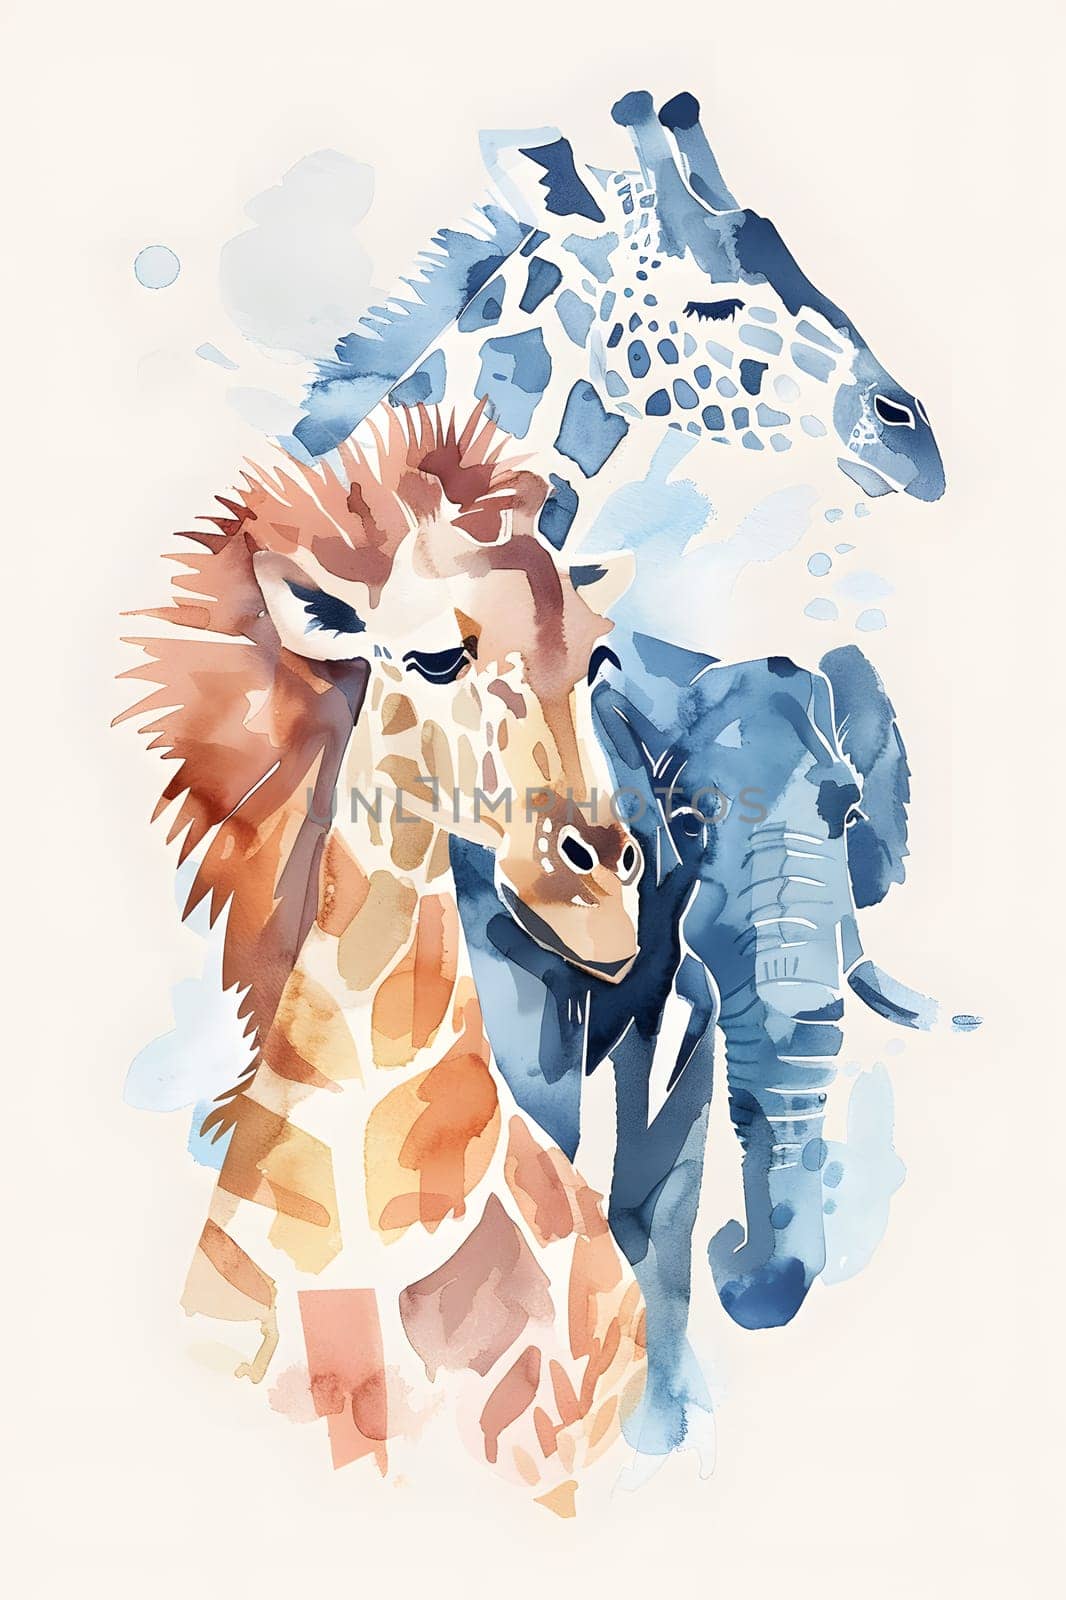 Watercolor painting of a giraffe, elephant and lion with electric blue patterns by Nadtochiy